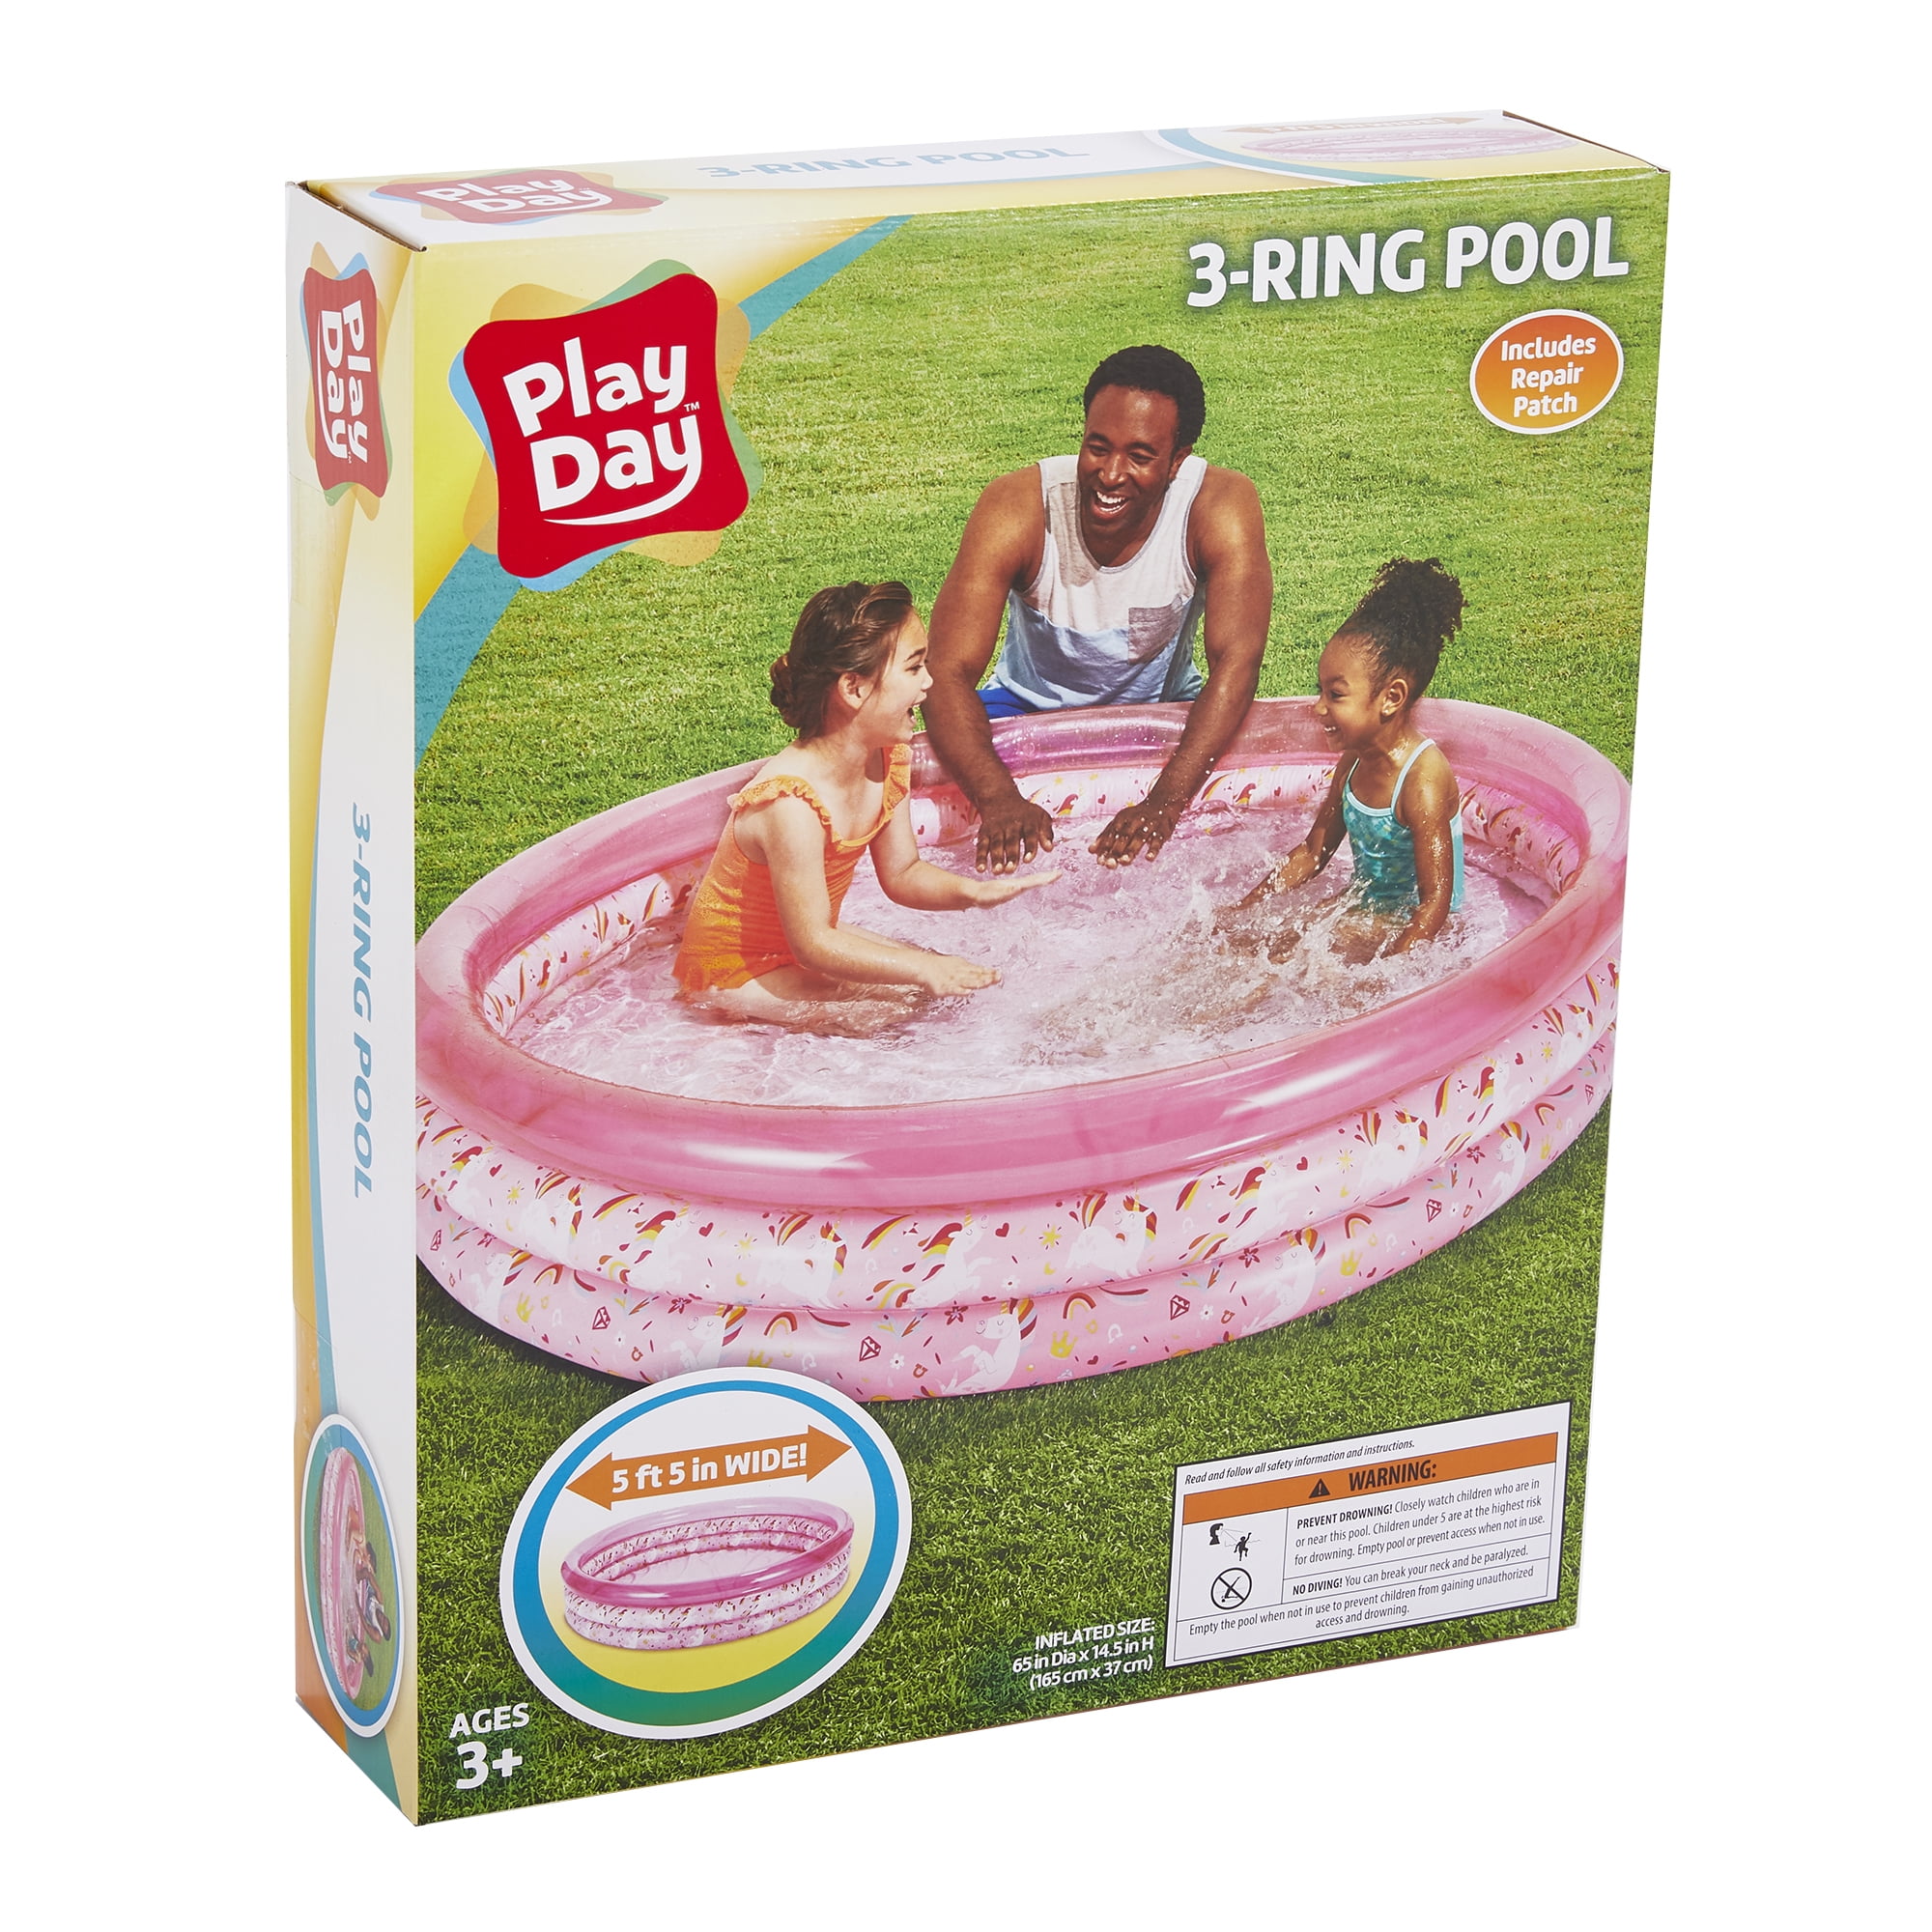 Inflatable Play Day Round Shark 3-Ring Pool for Kids 65 x 14.5 